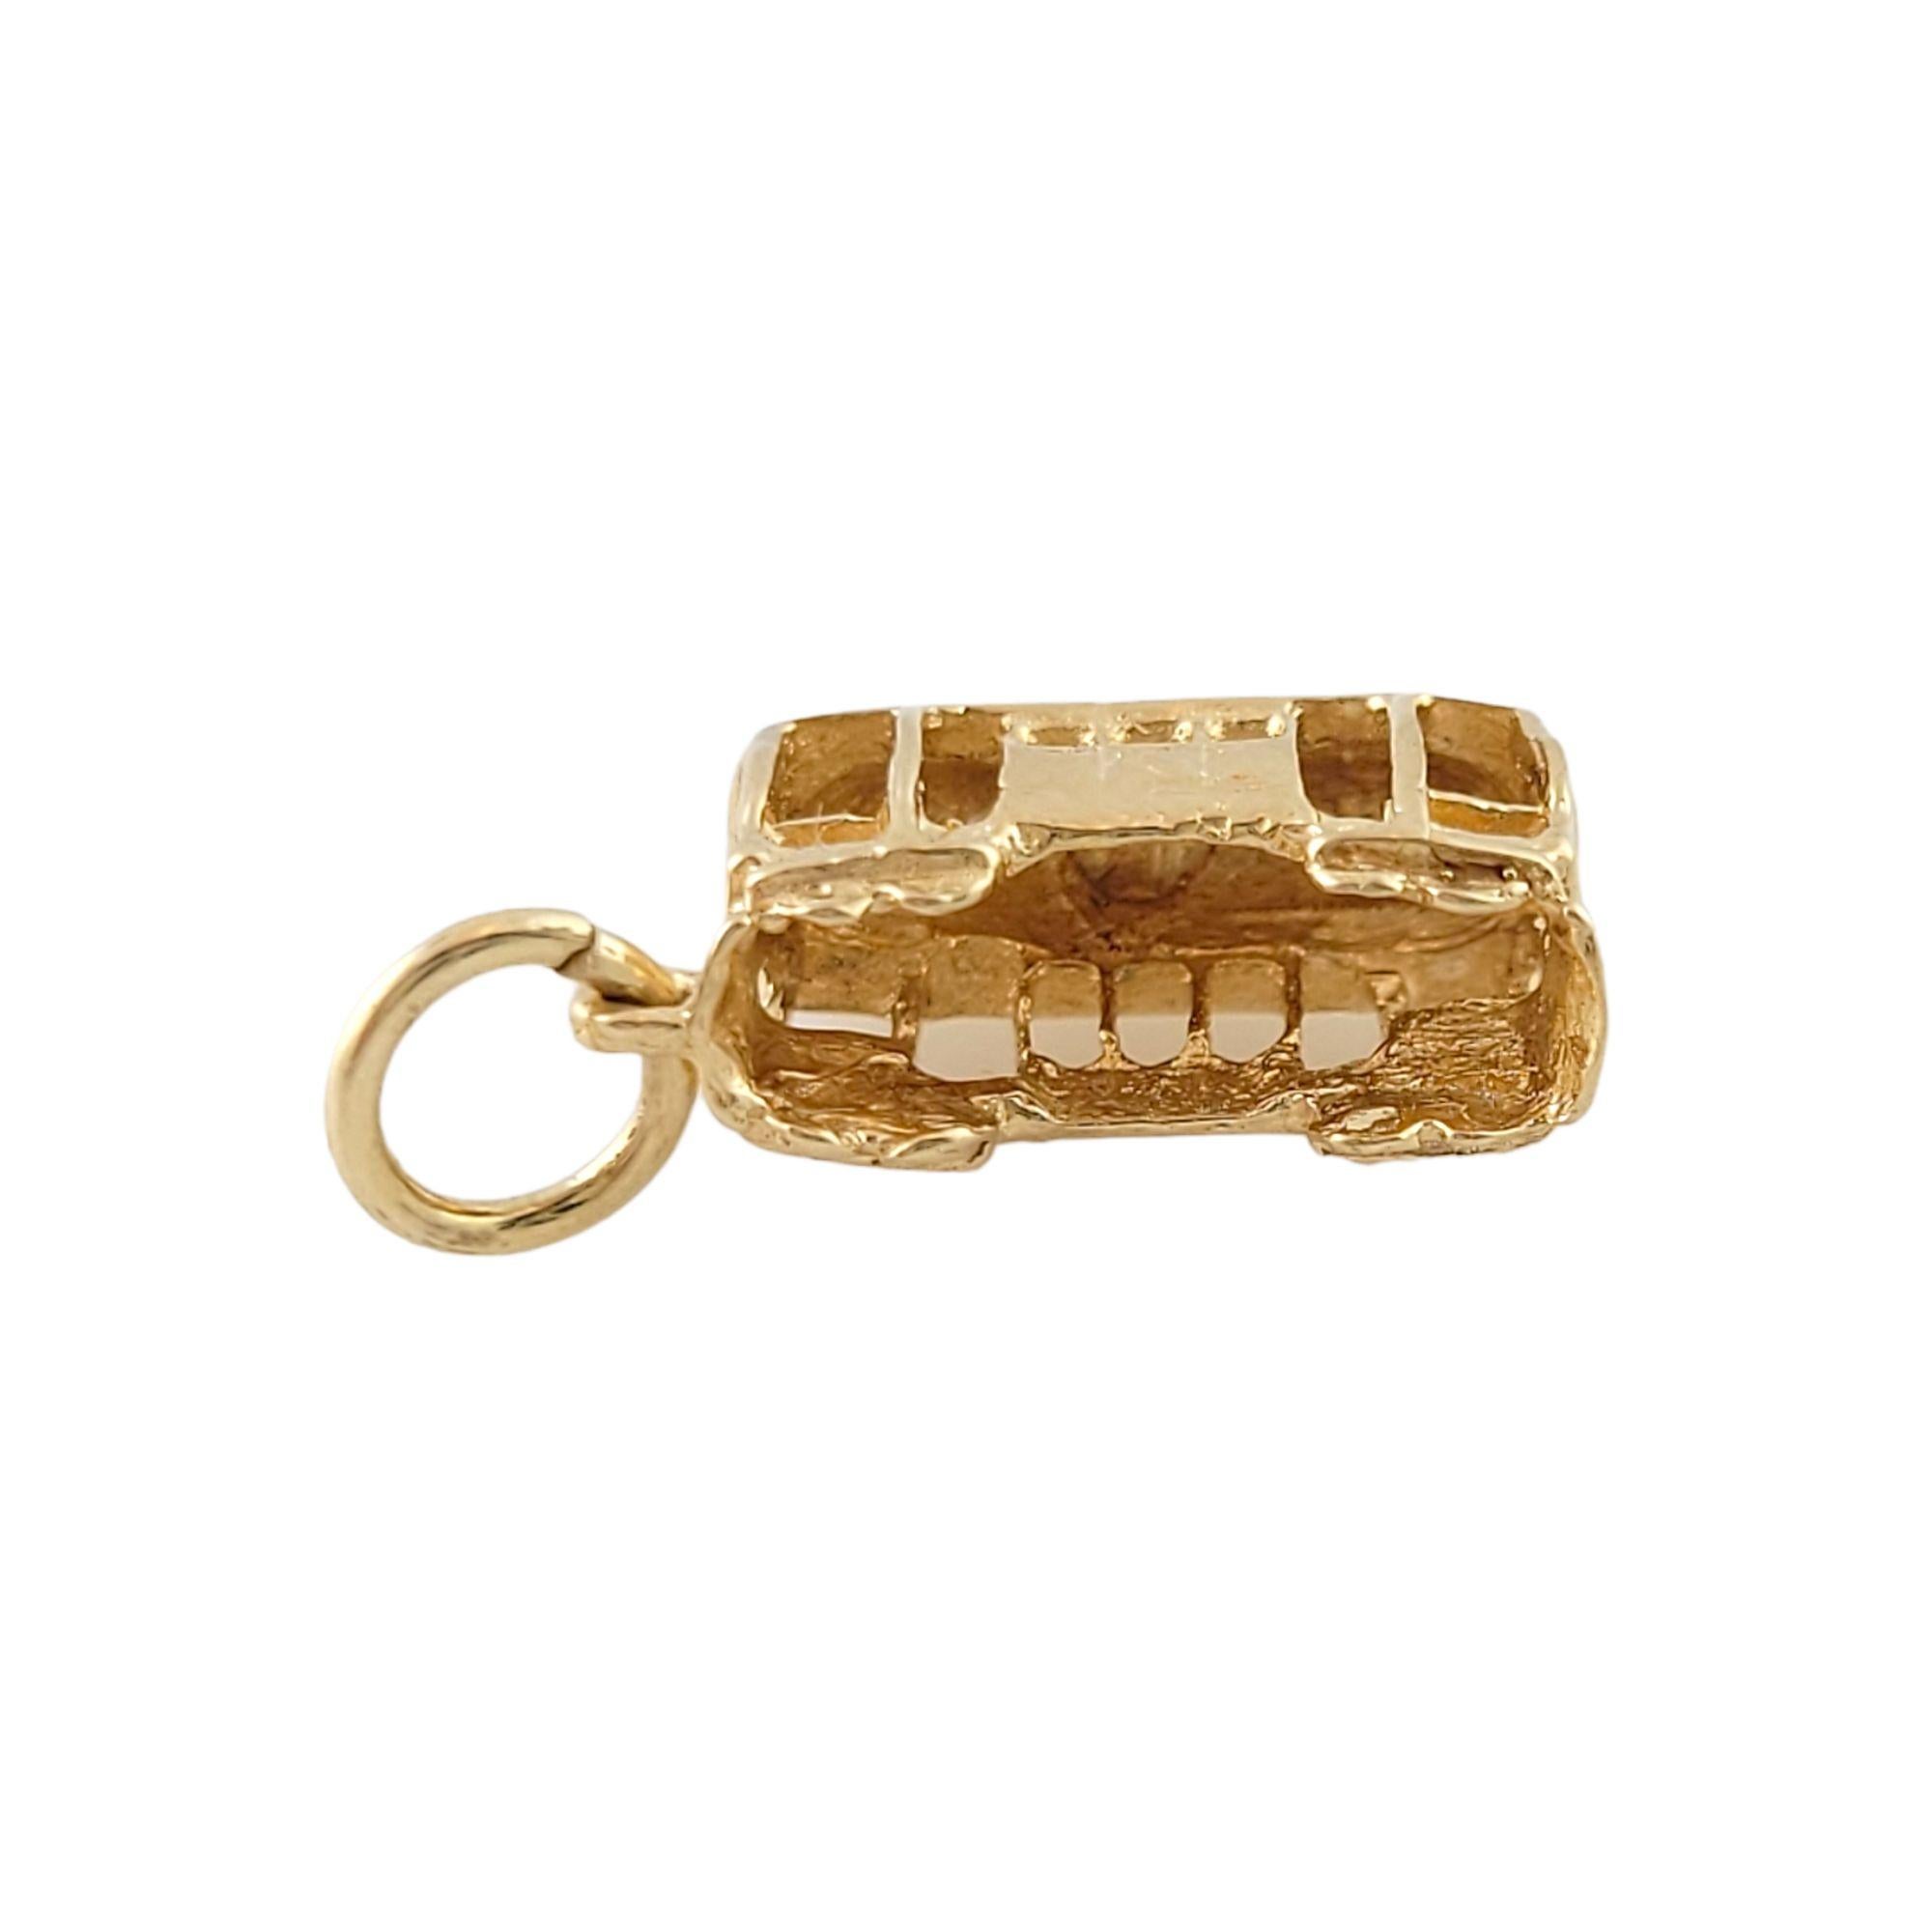 This 14K yellow gold charm is an adorable representation of a trolly train!

Size: 10mm X 13.5mm X 6mm

Weight: 1.66 g/ 1.1 dwt

Hallmark: 14K

Very good condition, professionally polished.

Will come packaged in a gift box or pouch (when possible)